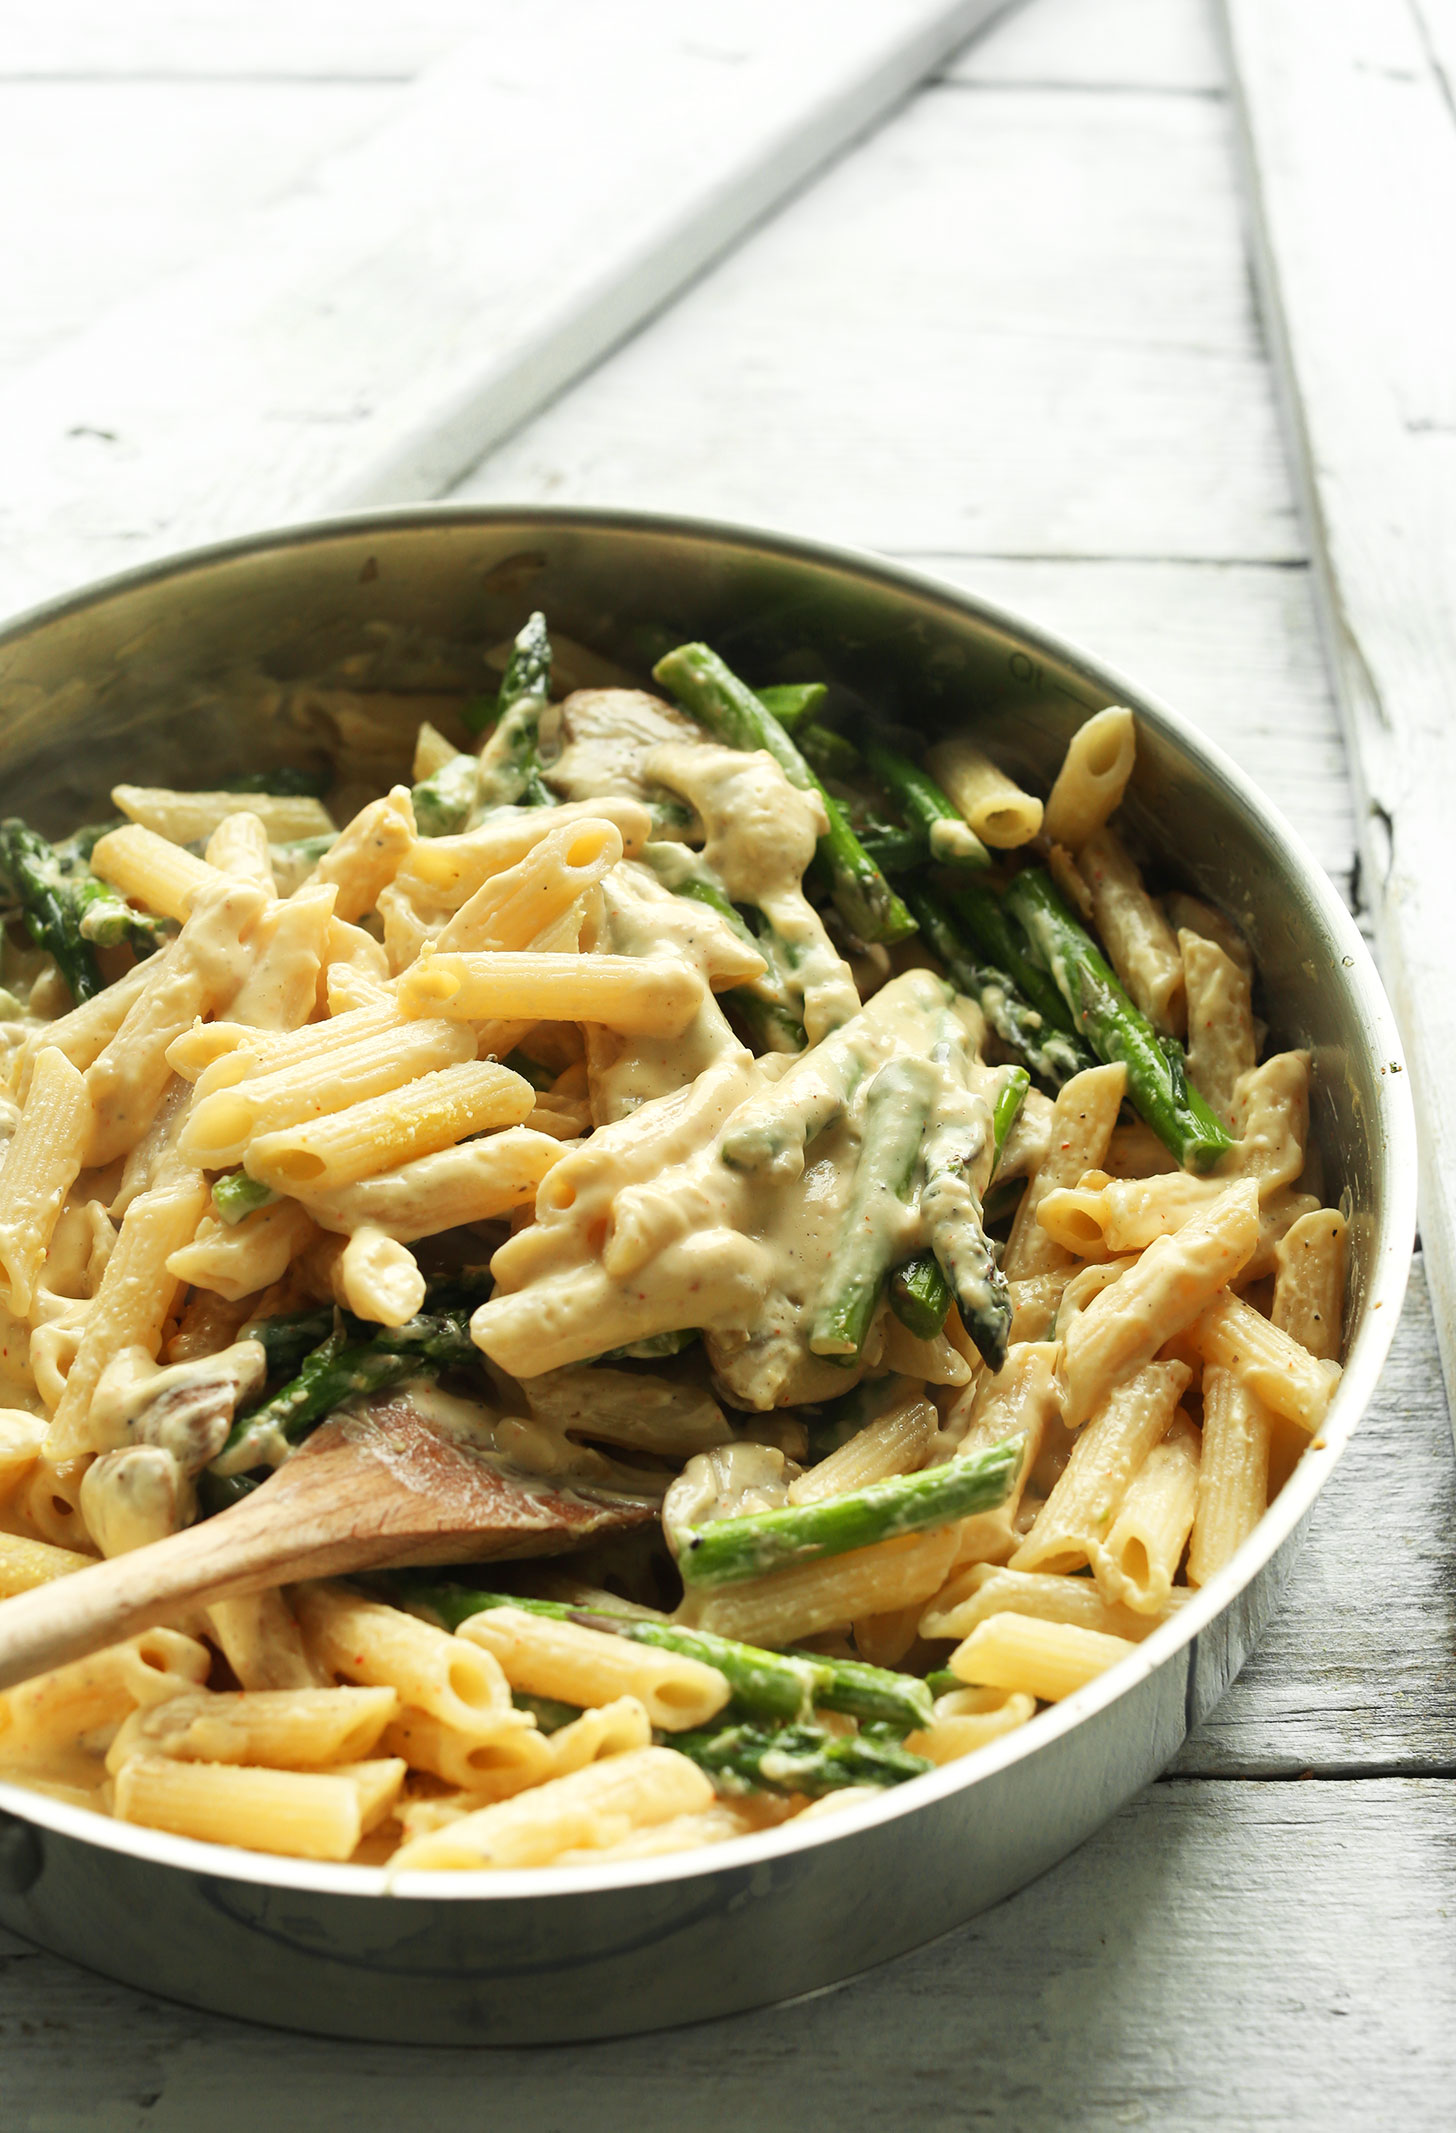 A pan of gluten-free vegan Creamy Asparagus & Mushroom Pasta for a comforting meal